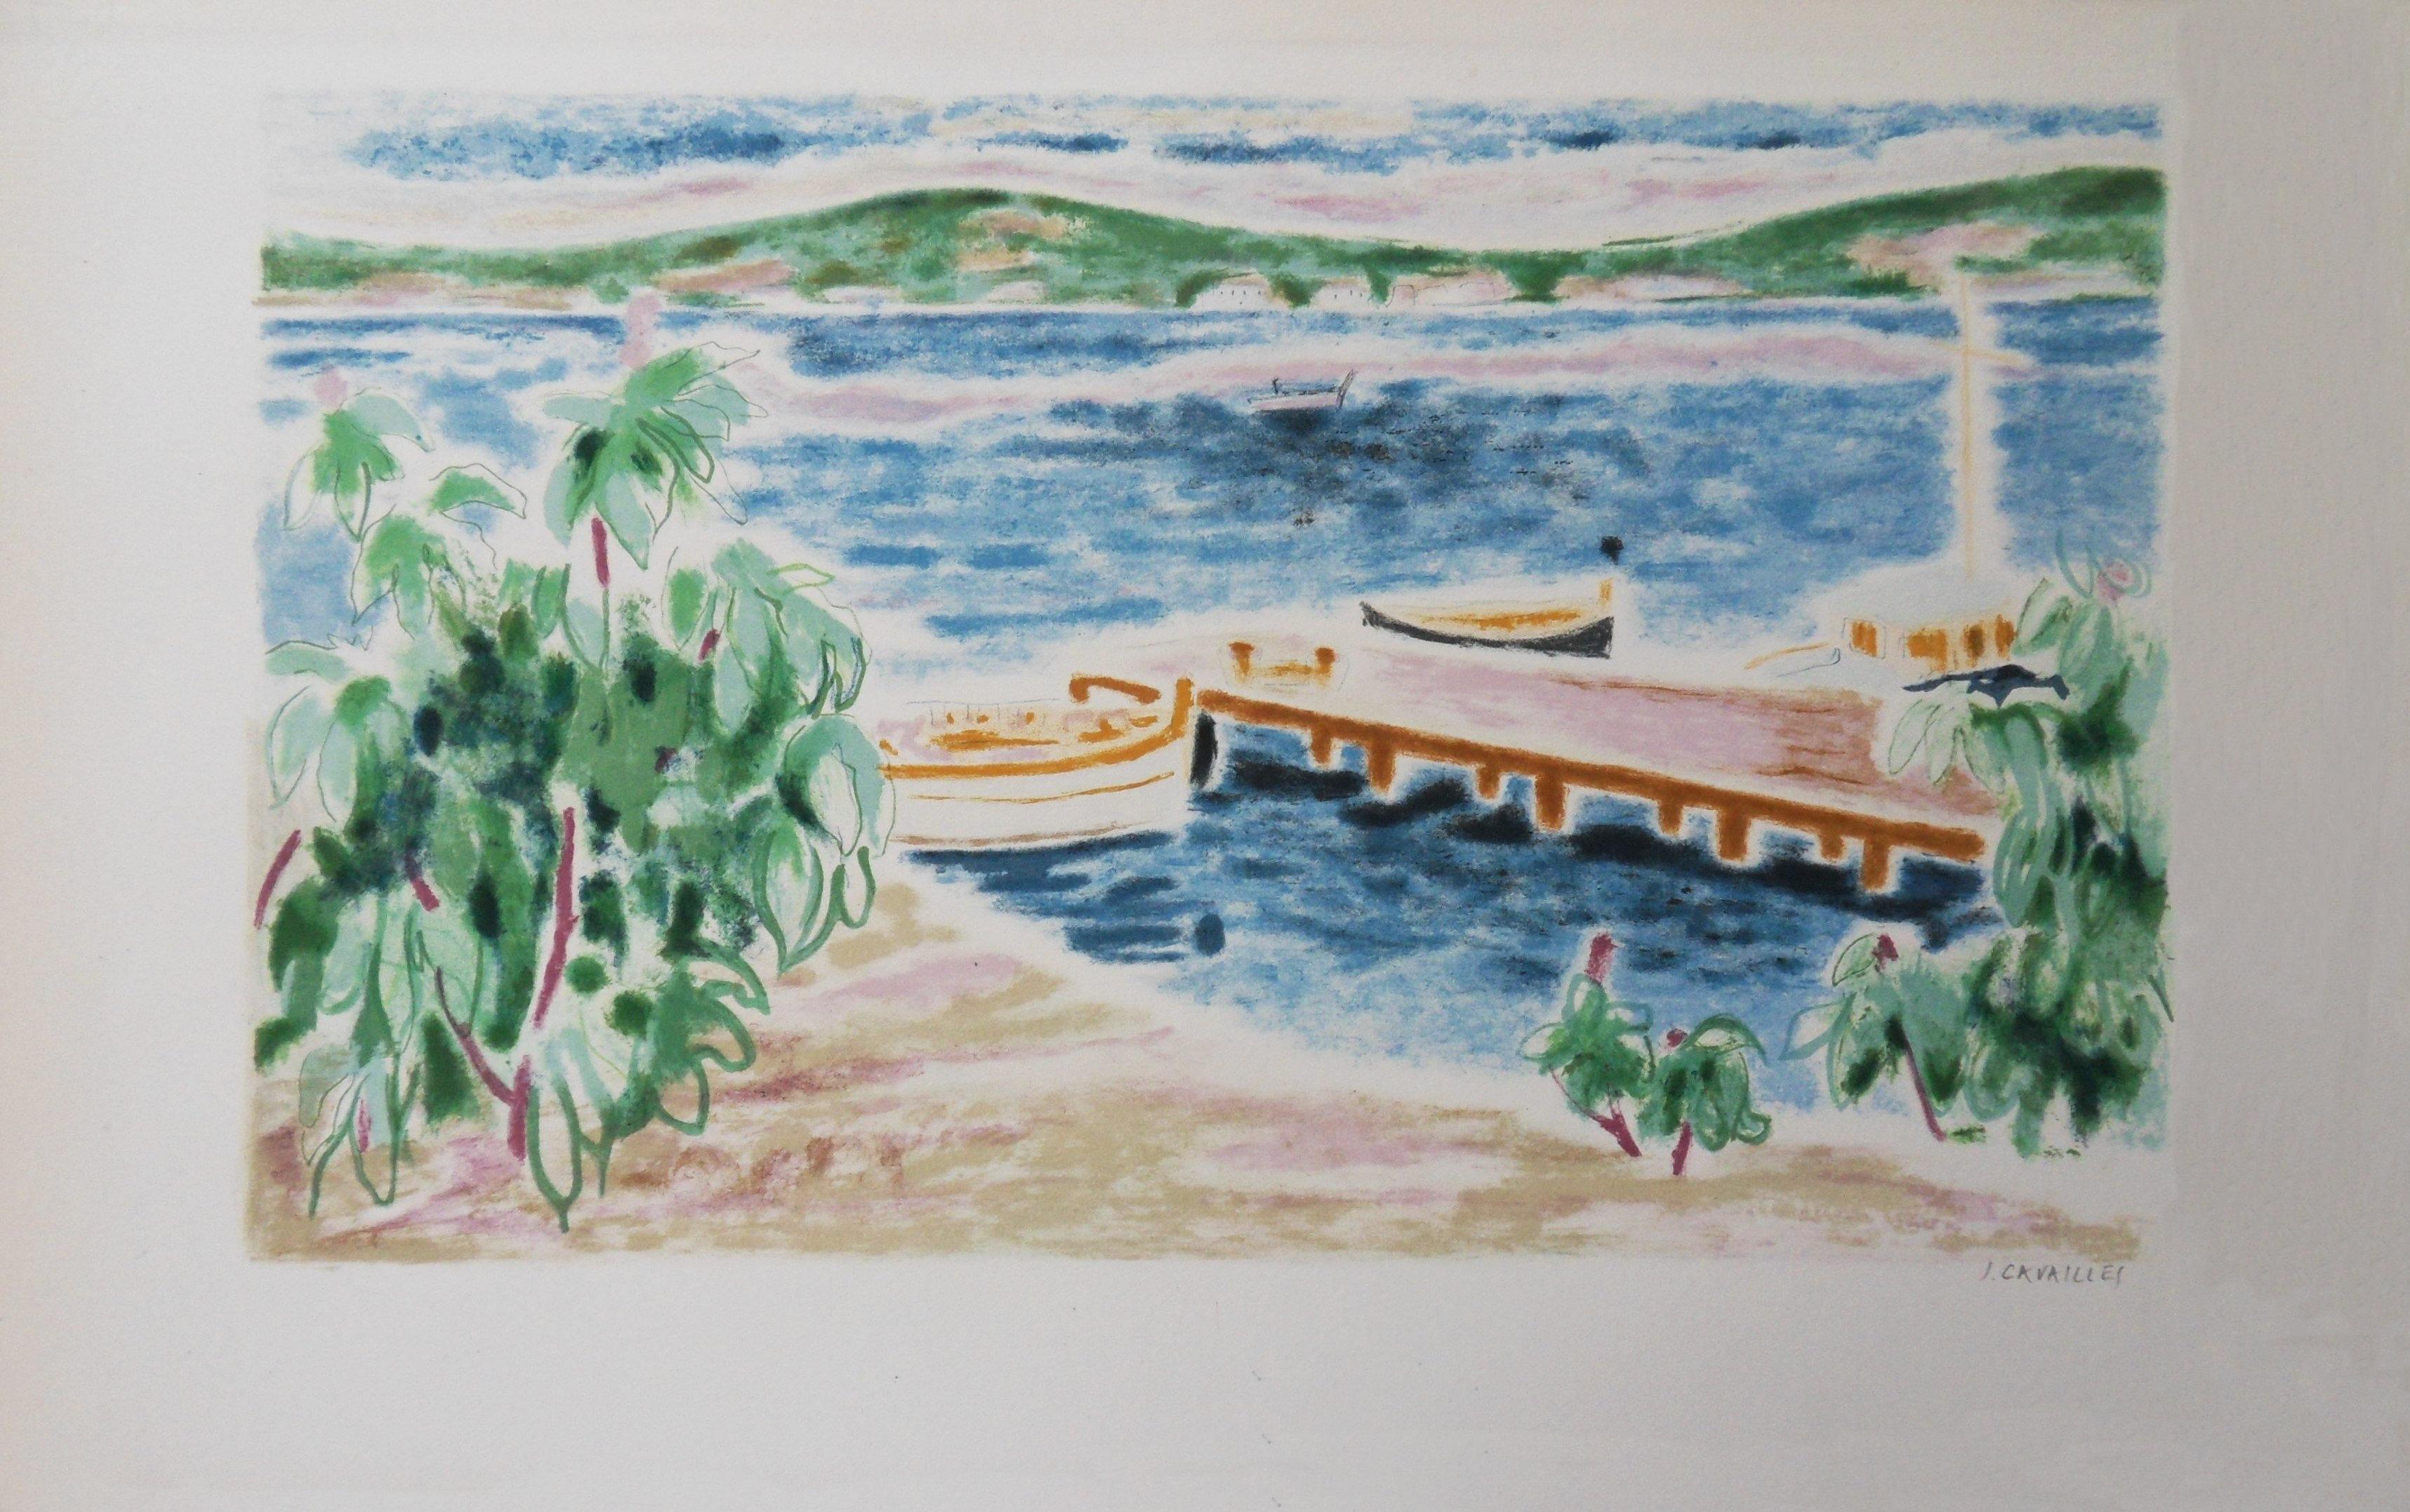 Jules Cavailles Landscape Print - Switzerland : View on the Lake - Original lithograph, Handsigned